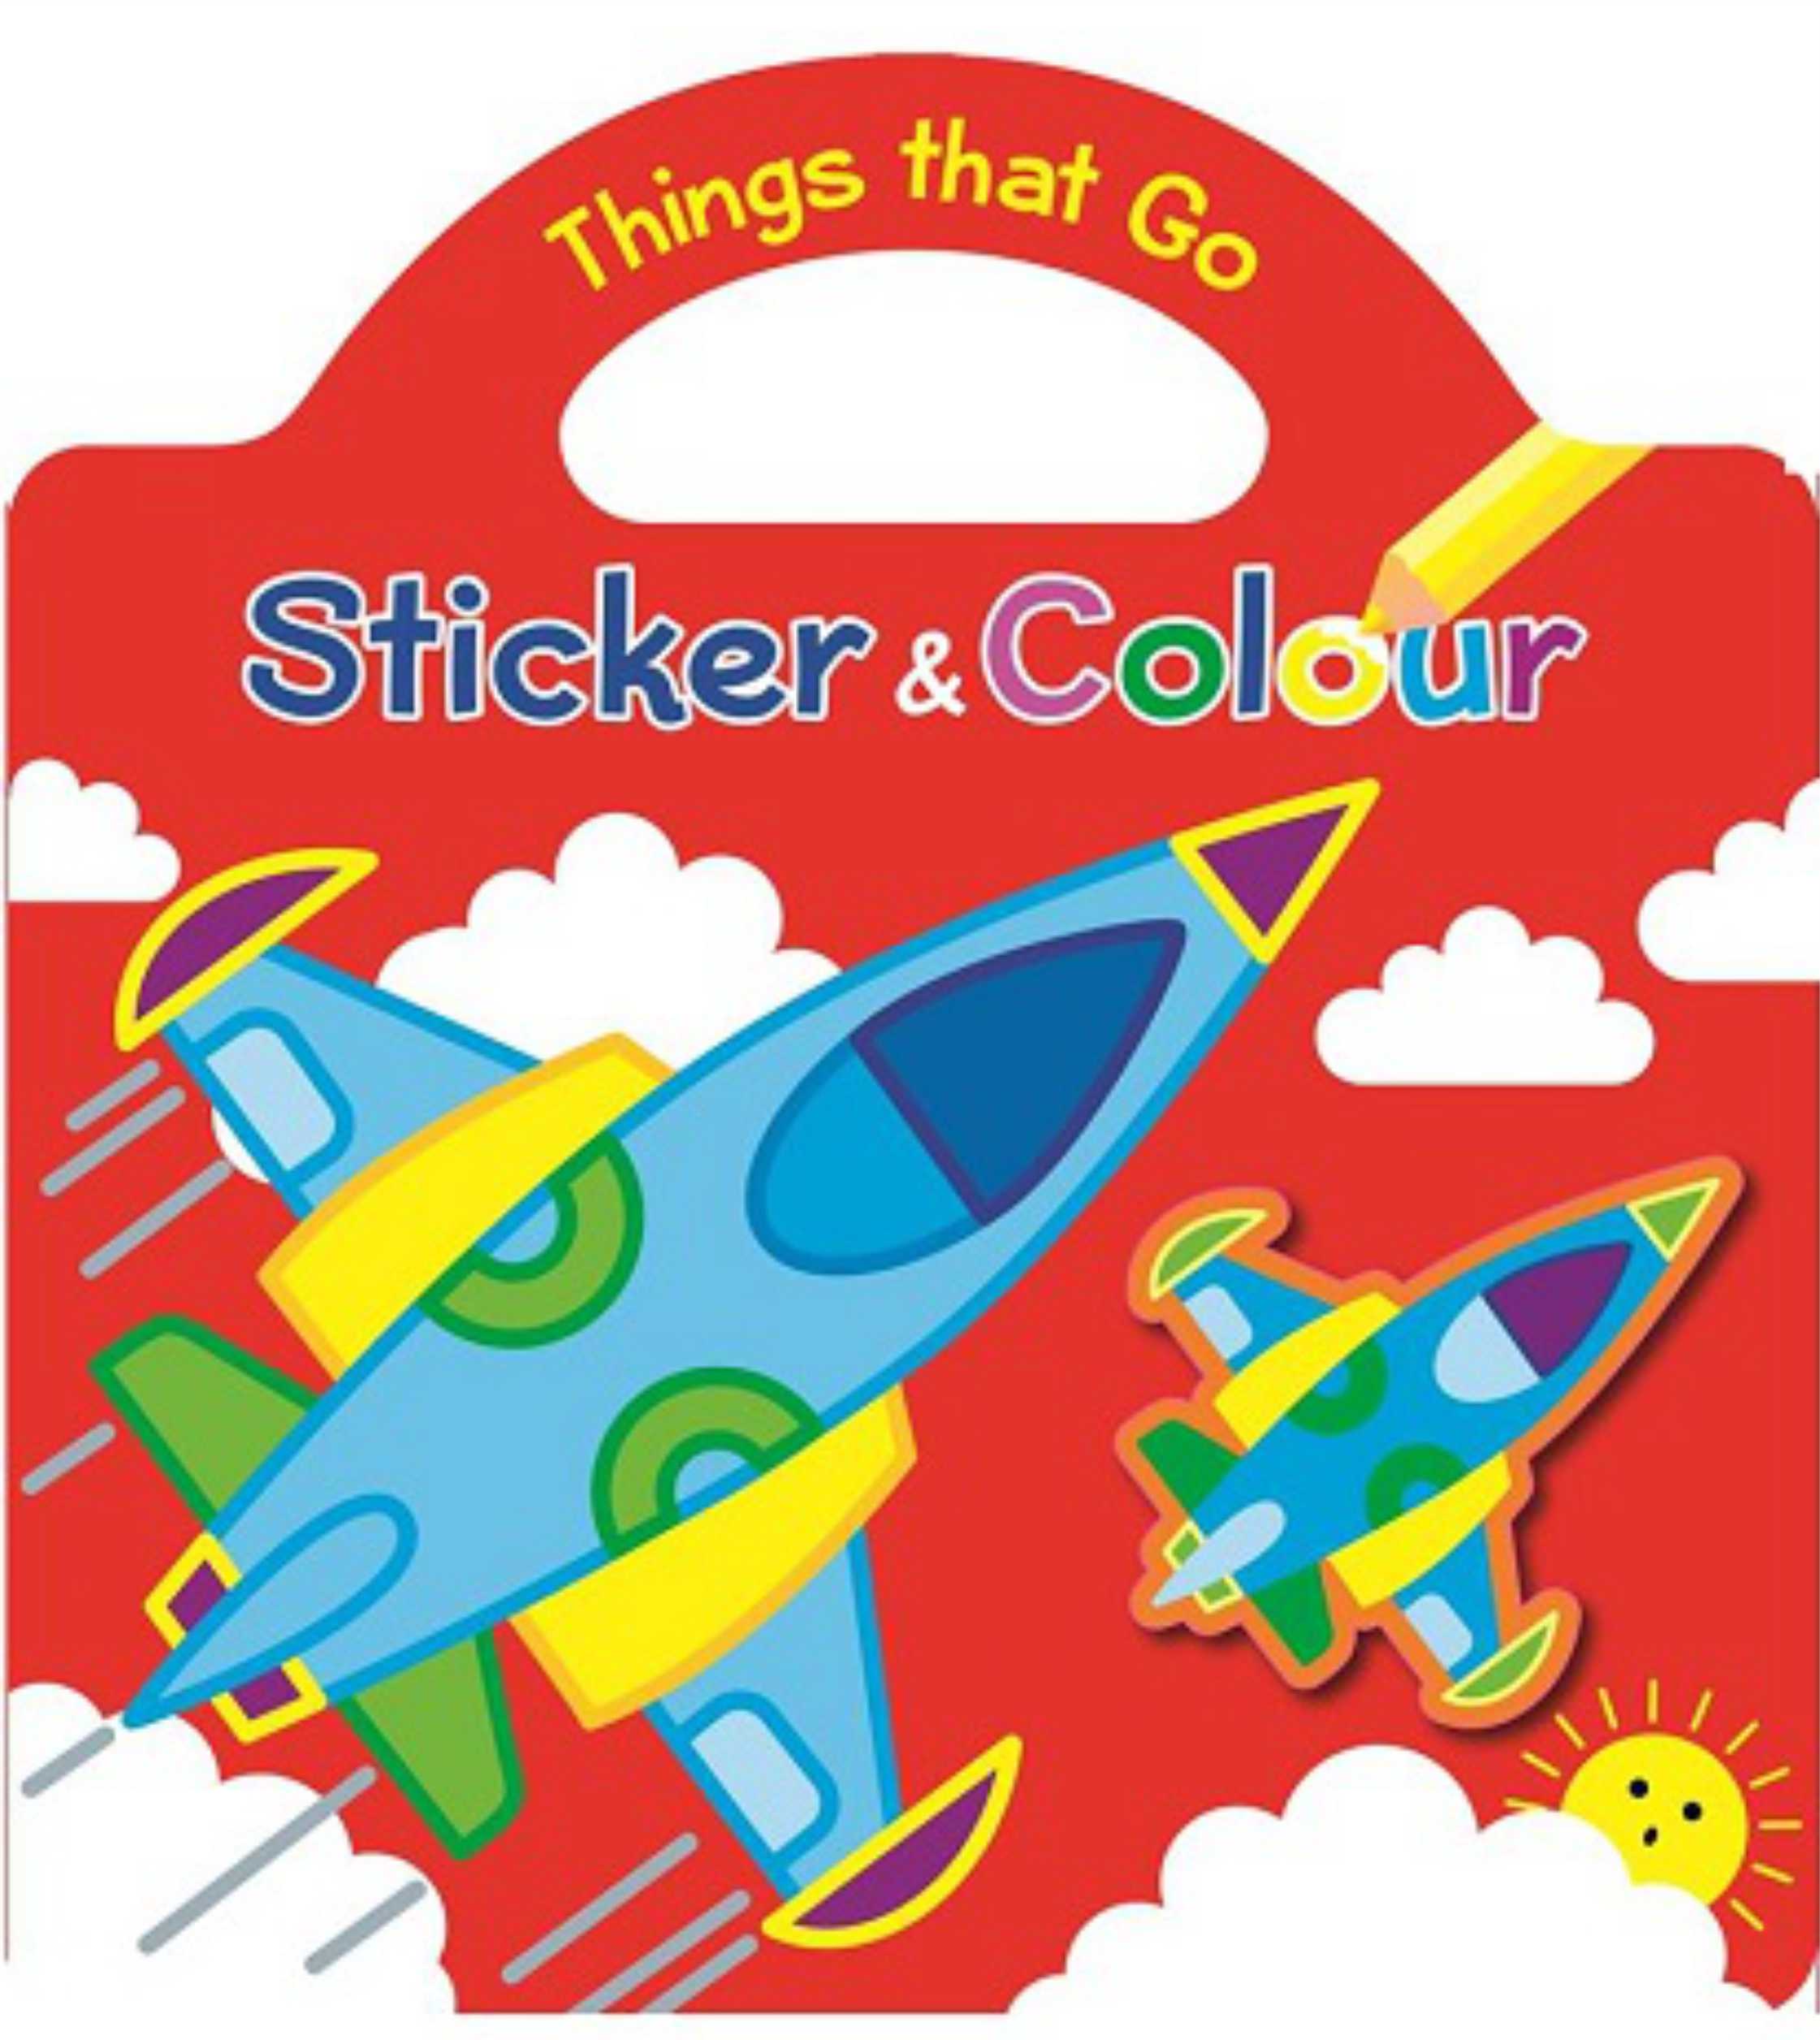 Things That go - Sticker & Colour Book 4